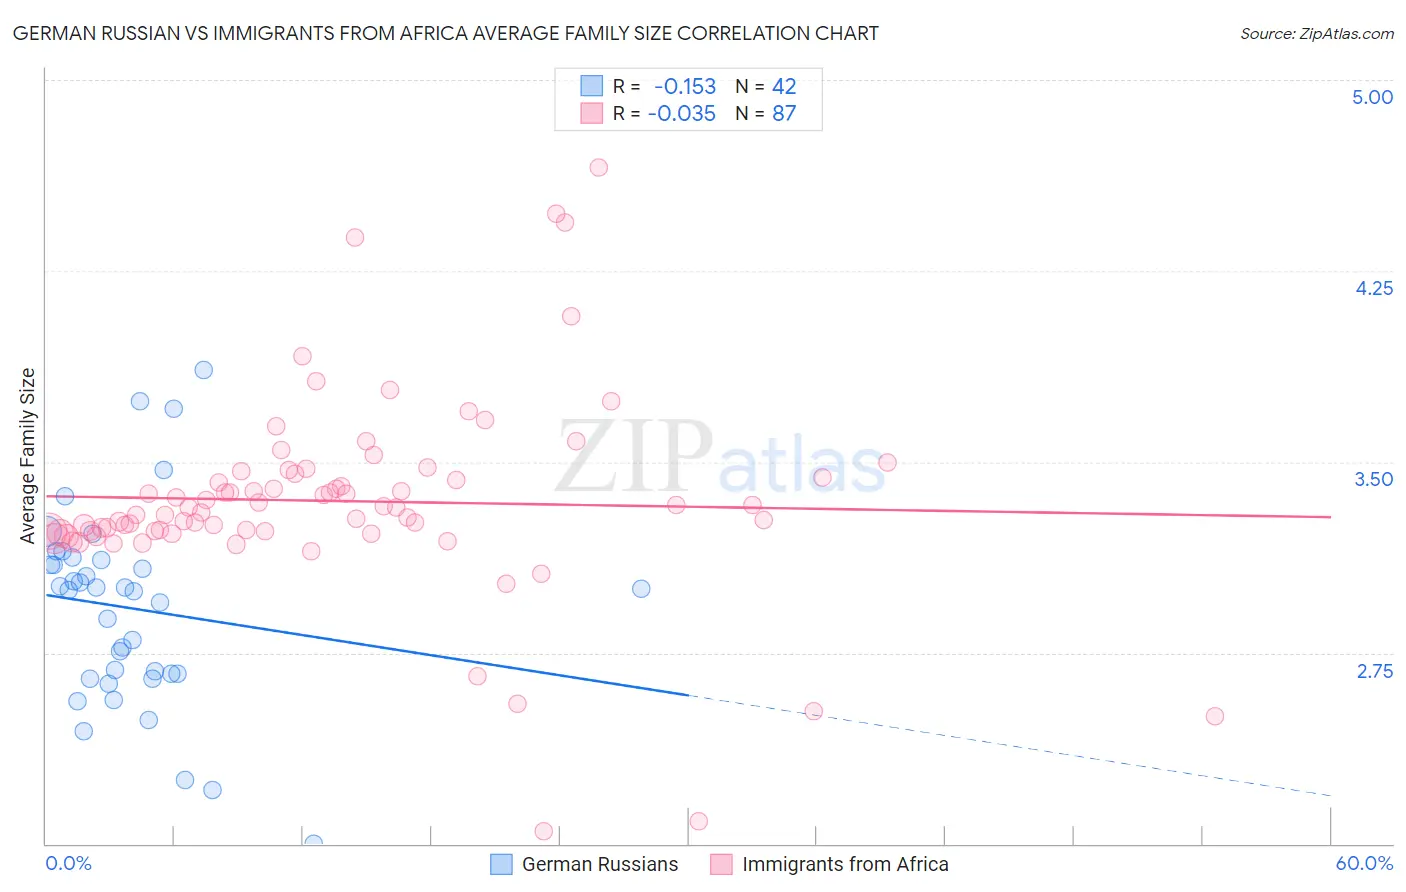 German Russian vs Immigrants from Africa Average Family Size